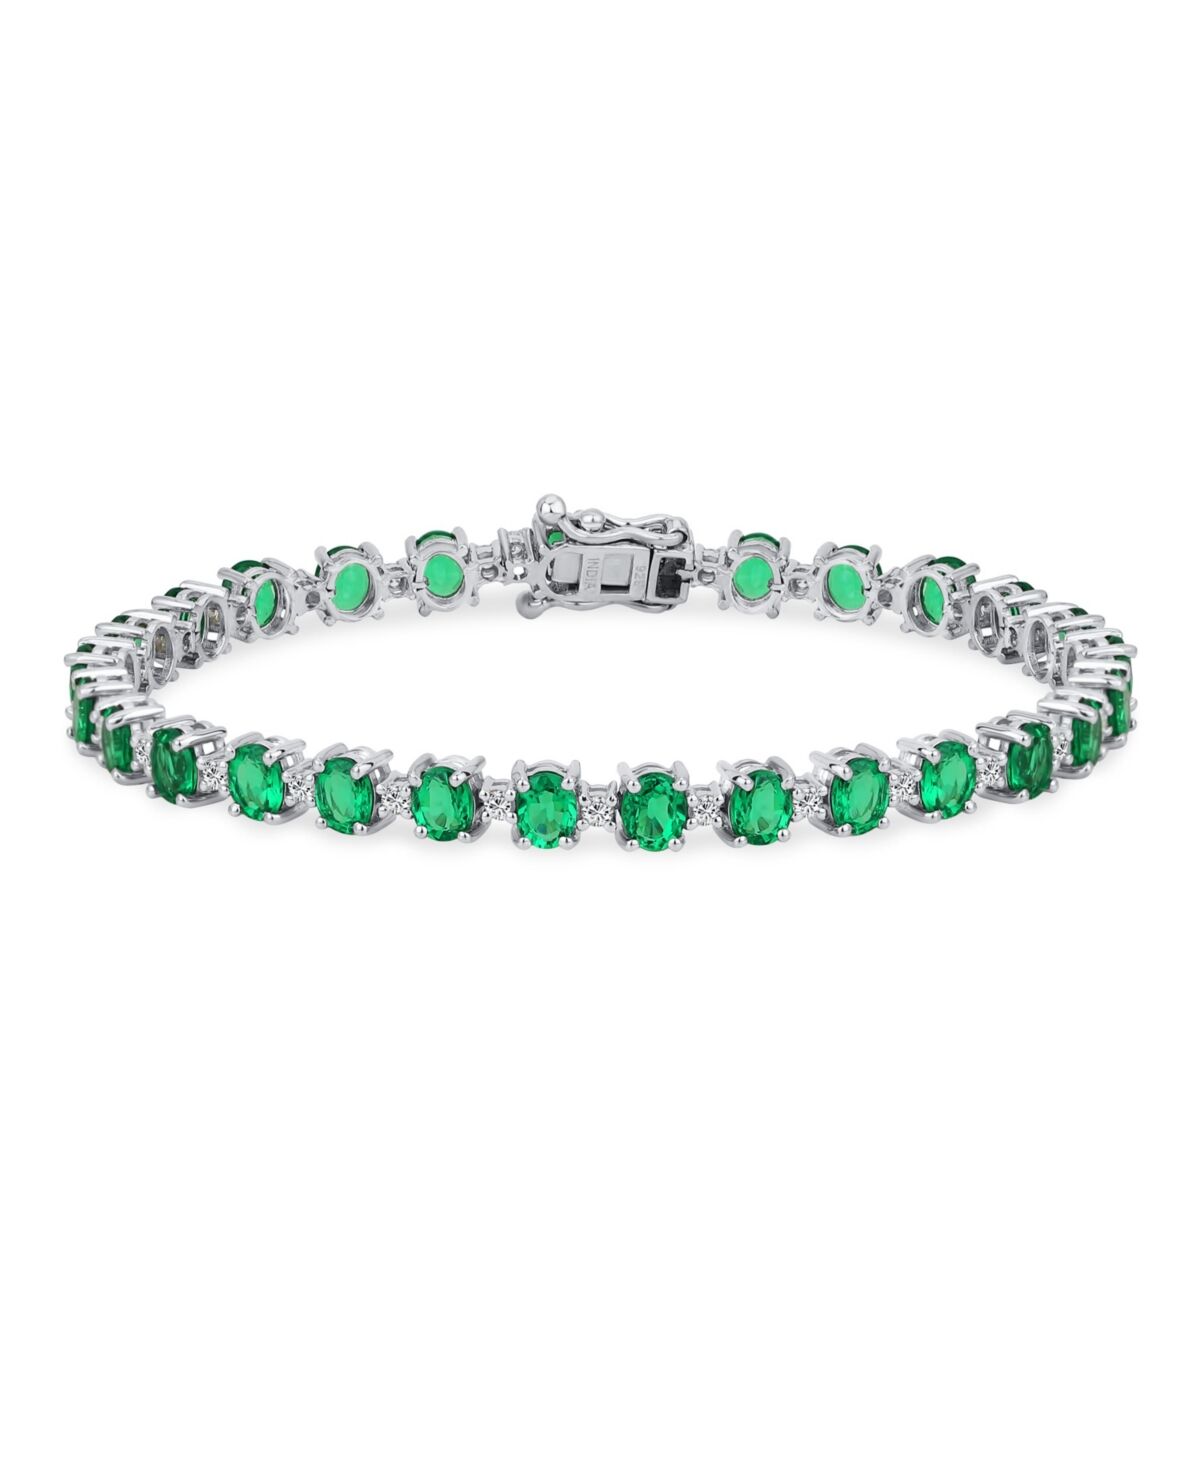 Bling Jewelry Simple Strand Alternating Created Green Emerald & Zircon Tennis Bracelet For Women .925 Sterling Silver May Birthstone 7.25 Inch - Green